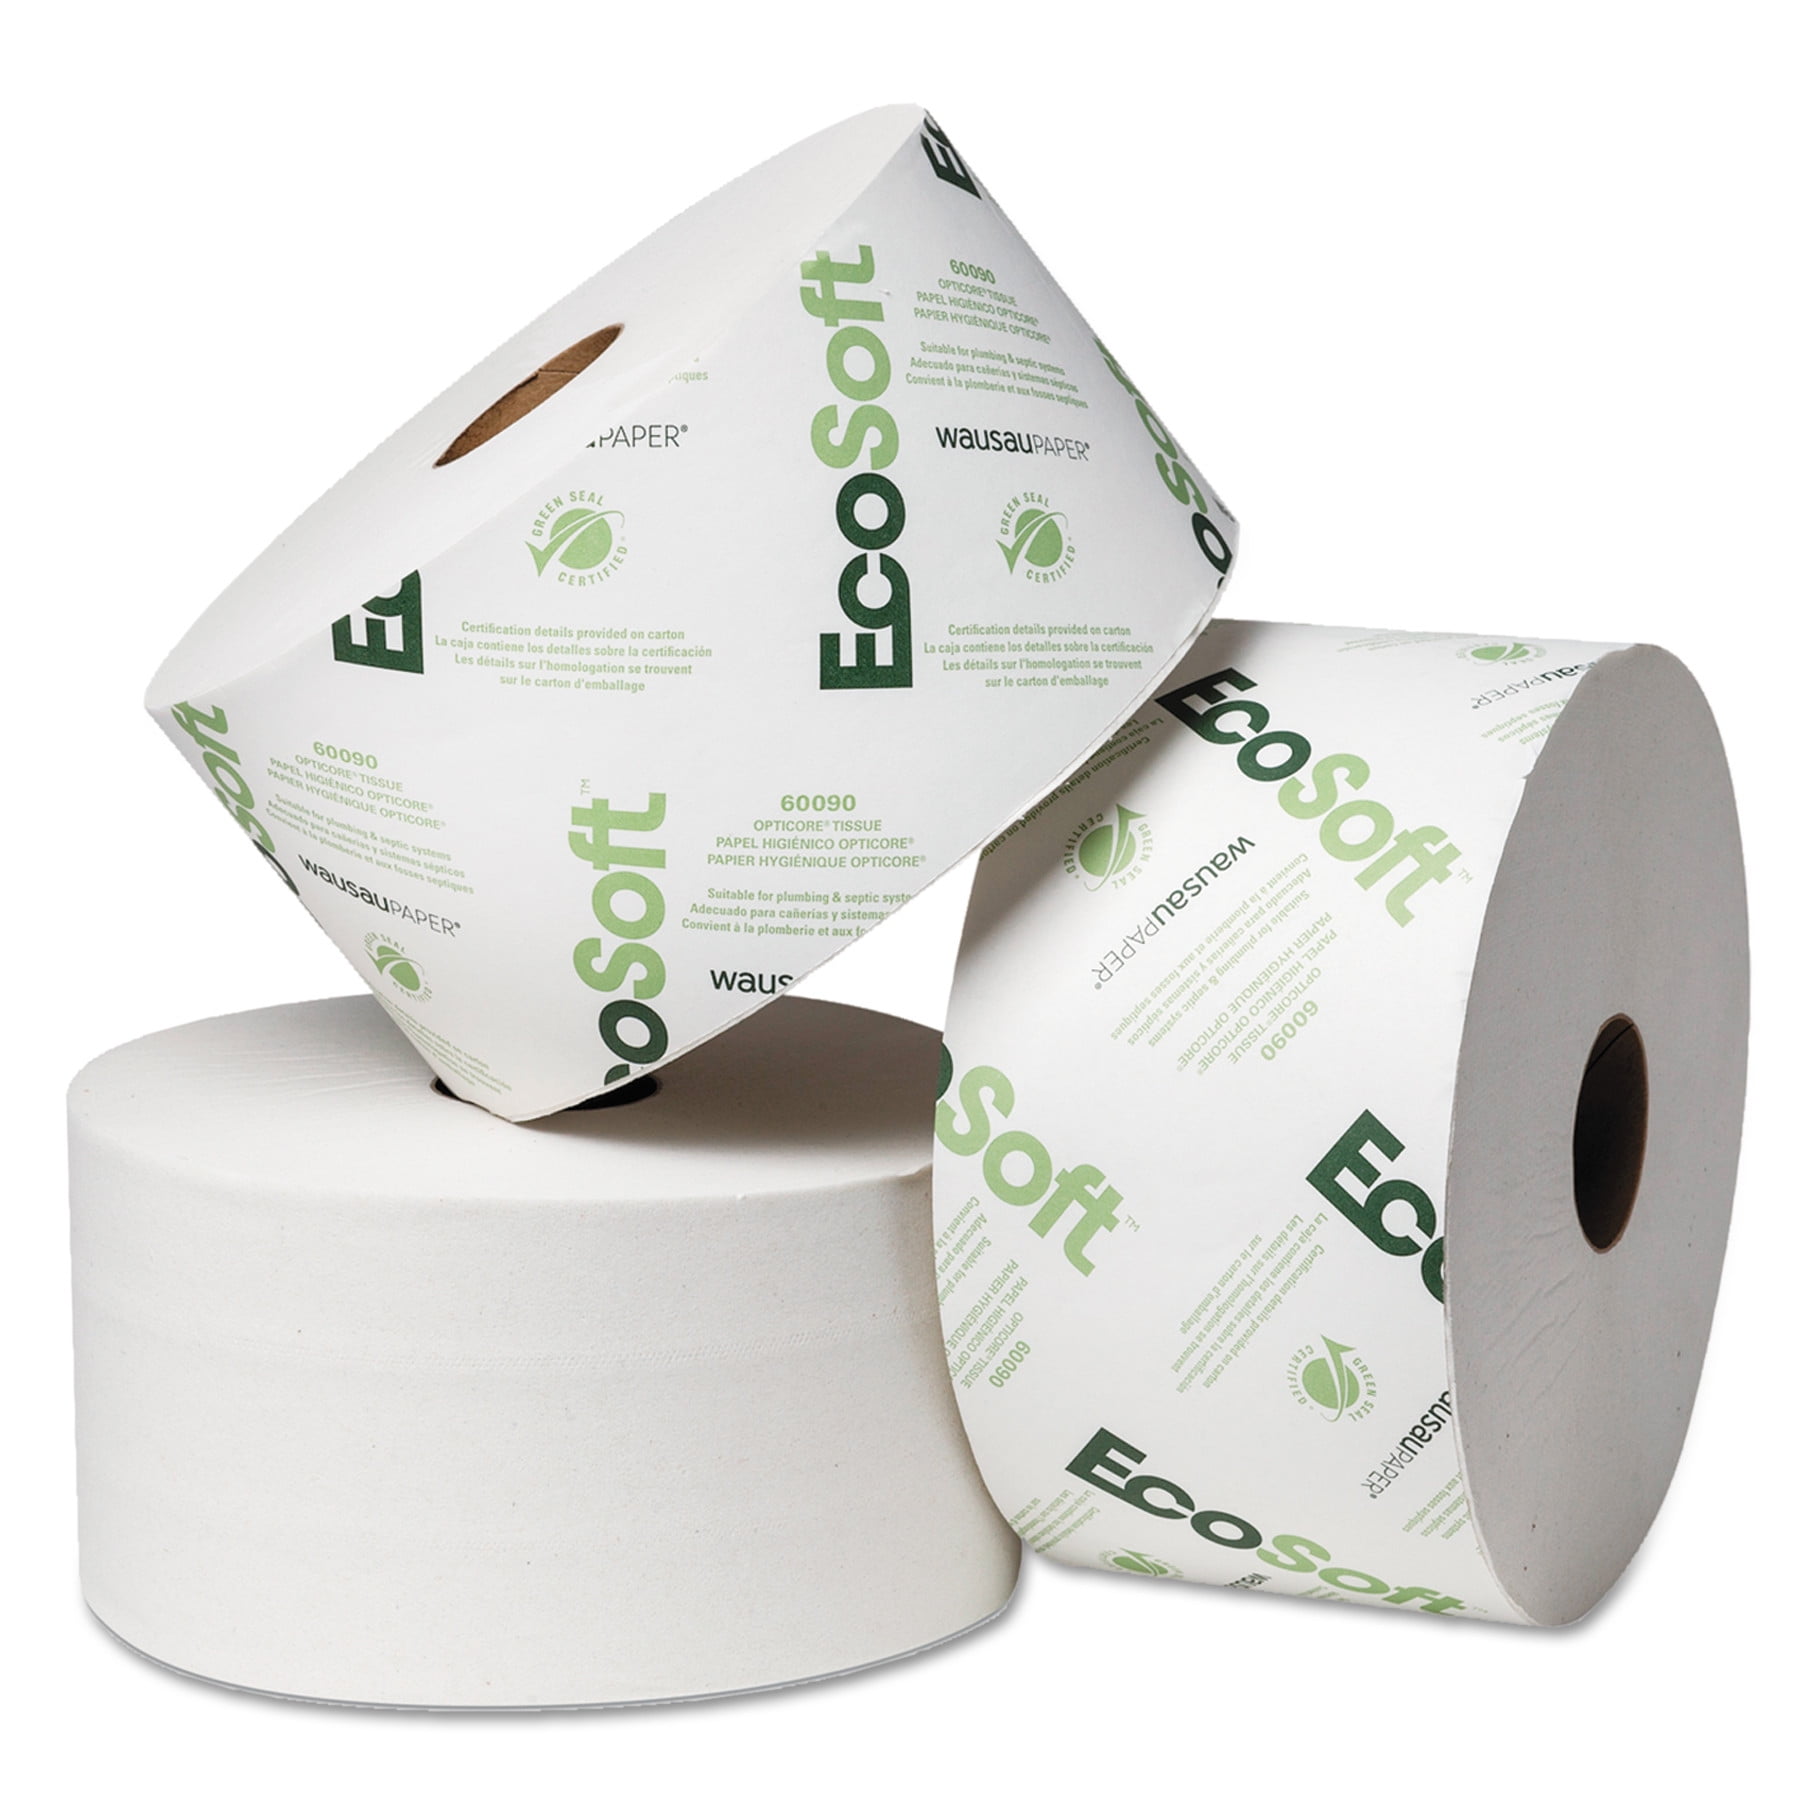 Case of 36 Rolls, 865 Sheets per Roll, 31,140 Sheets per Case Tork 162090 Advanced Bath Tissue Roll with OptiCore White 3.75 Width x 4.0 Length 2-Ply